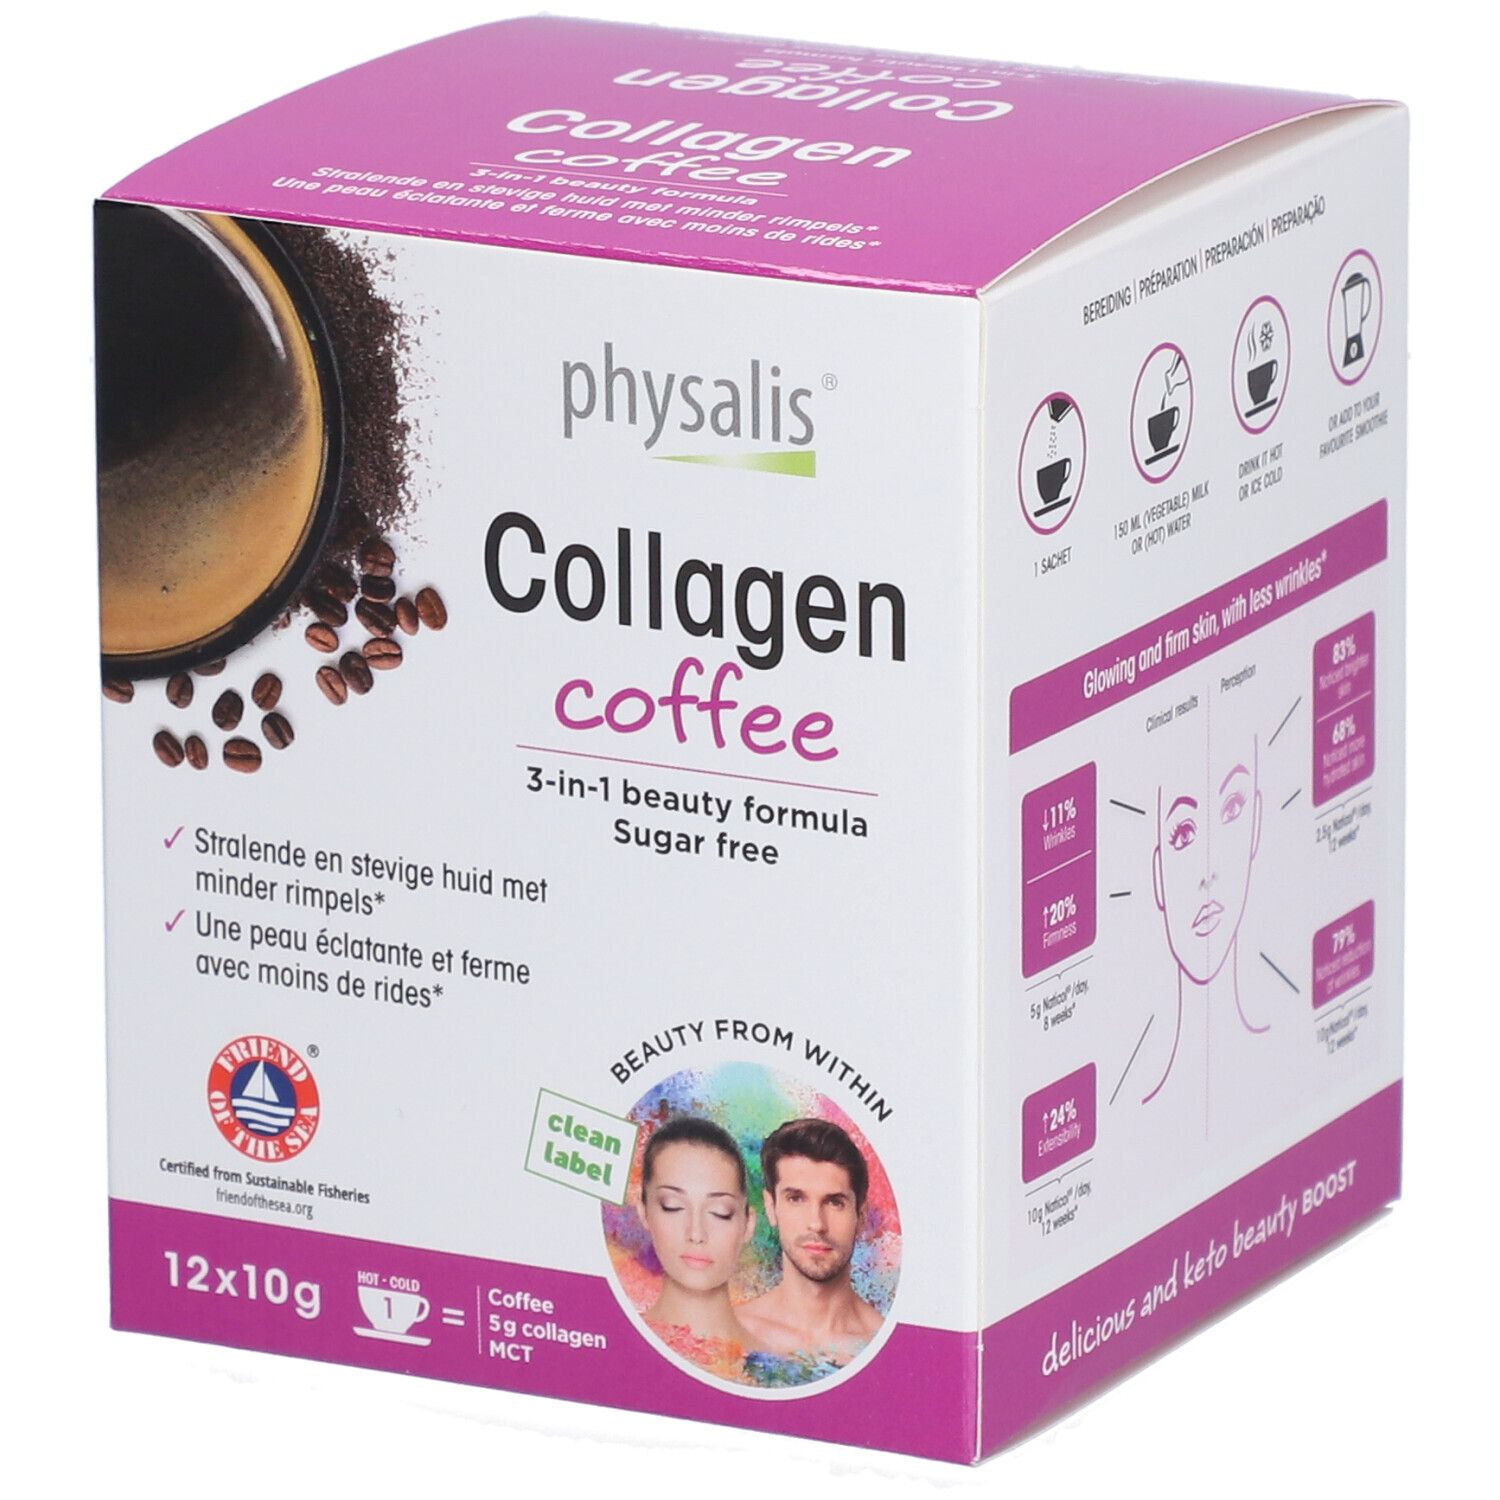 Physalis® Collagen Coffee